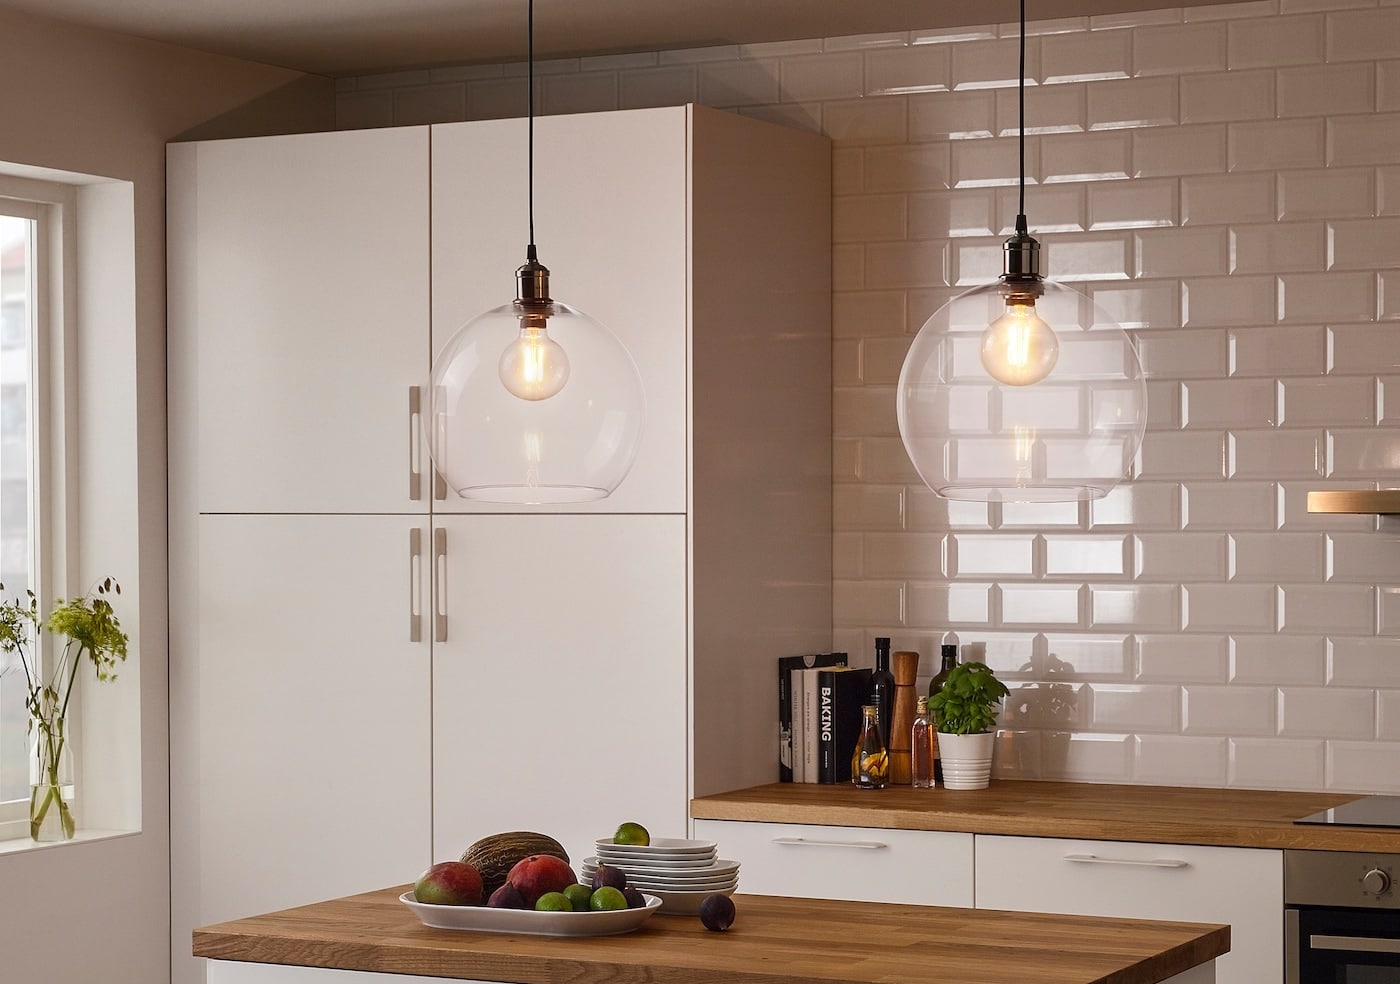 Hueblog: Ikea launches new filament lamp with 470 lumens